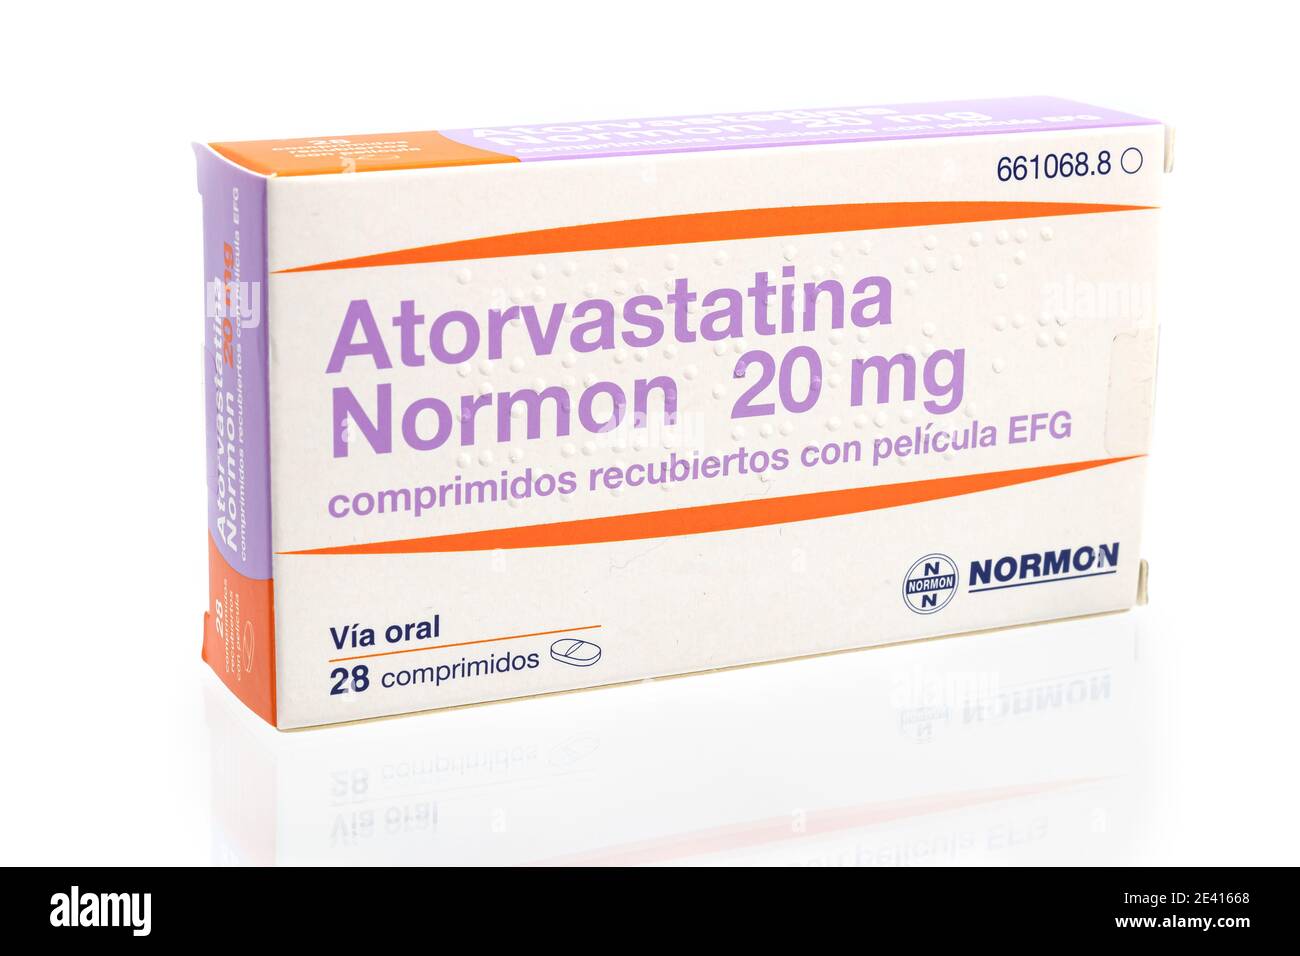 Huelva, Spain - January 21, 2021: Spanish Box of Atorvastatin brand NORMON. It is a statin medication used to prevent cardiovascular disease in those Stock Photo